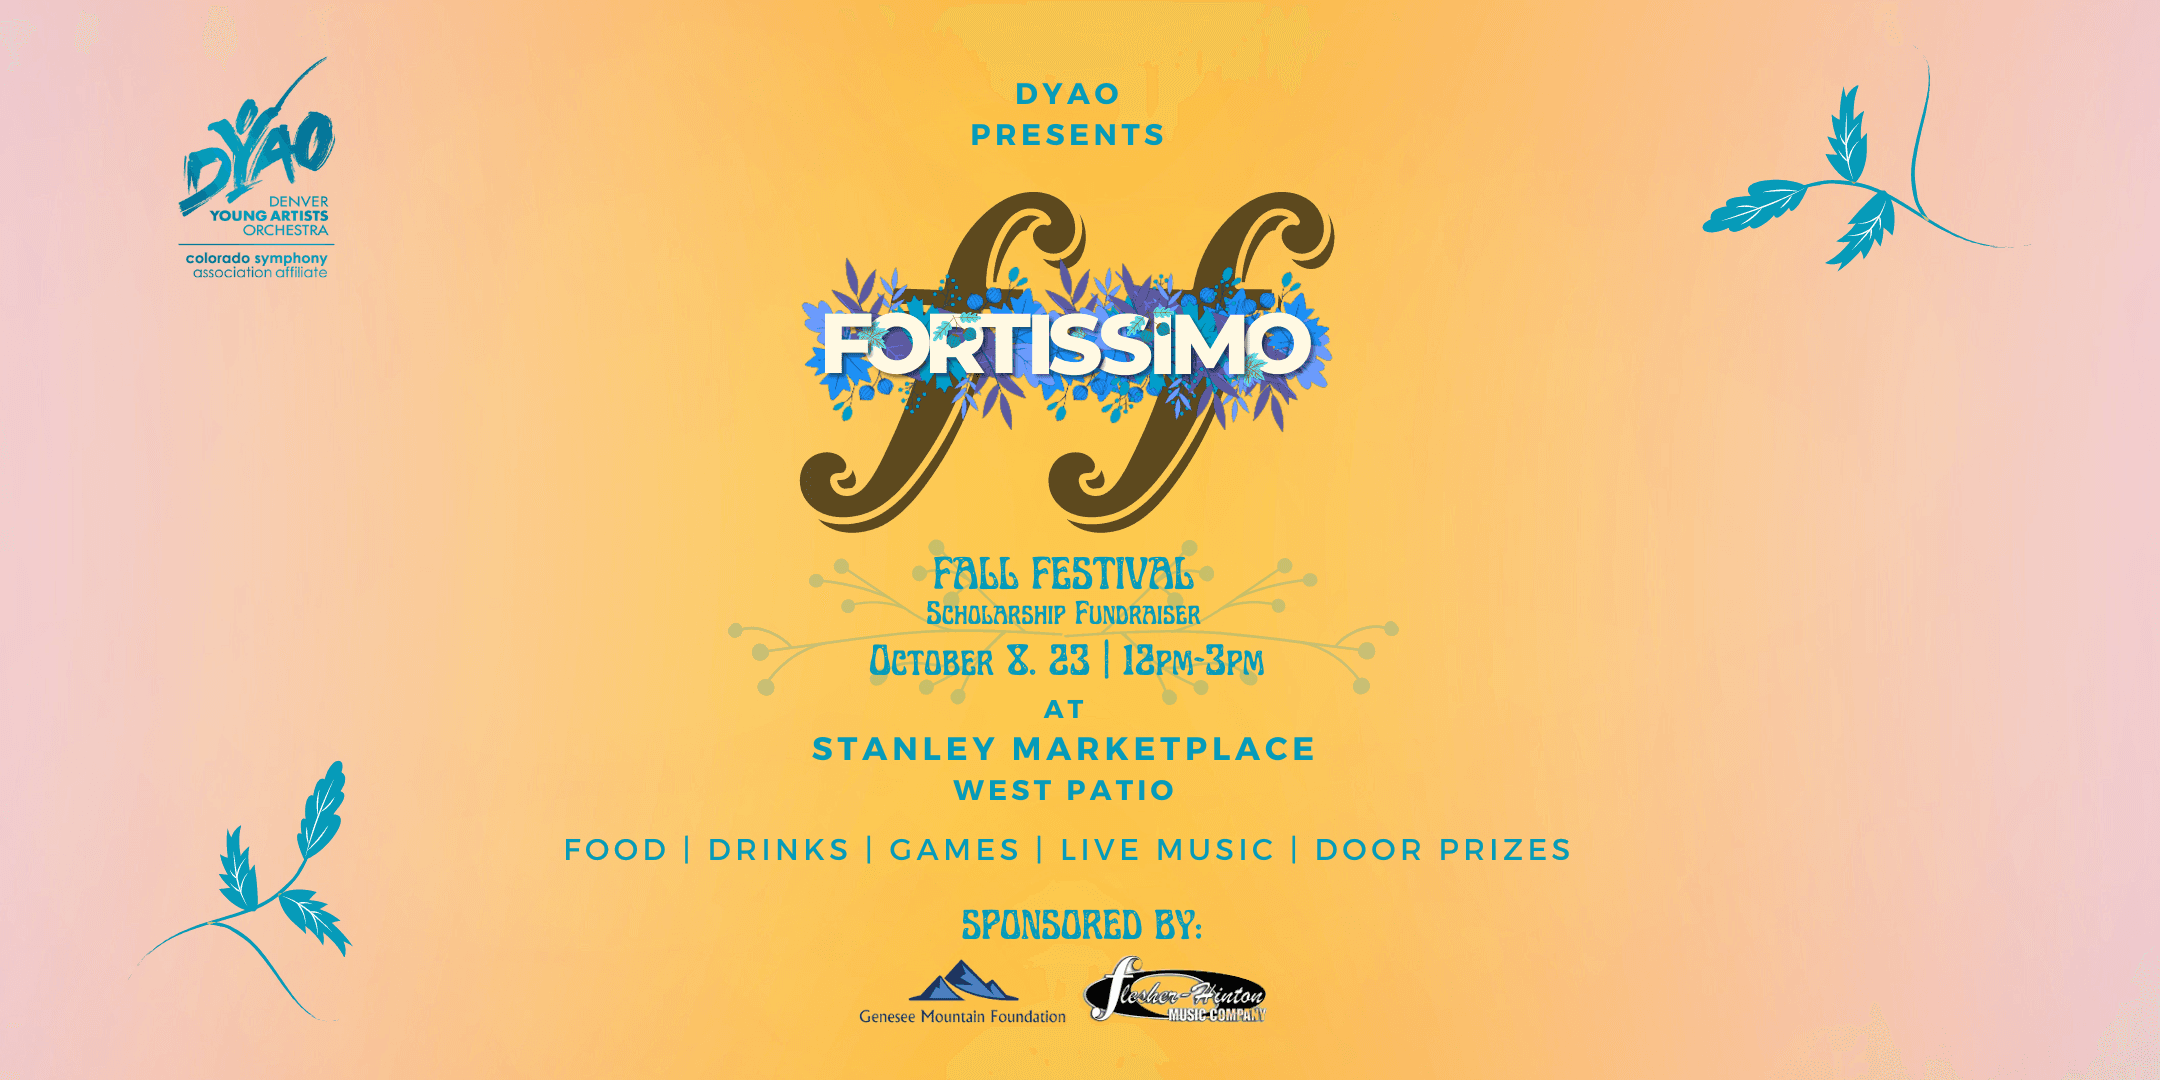 FORTISSIMO: DYAO's 2nd Annual Fall Festival